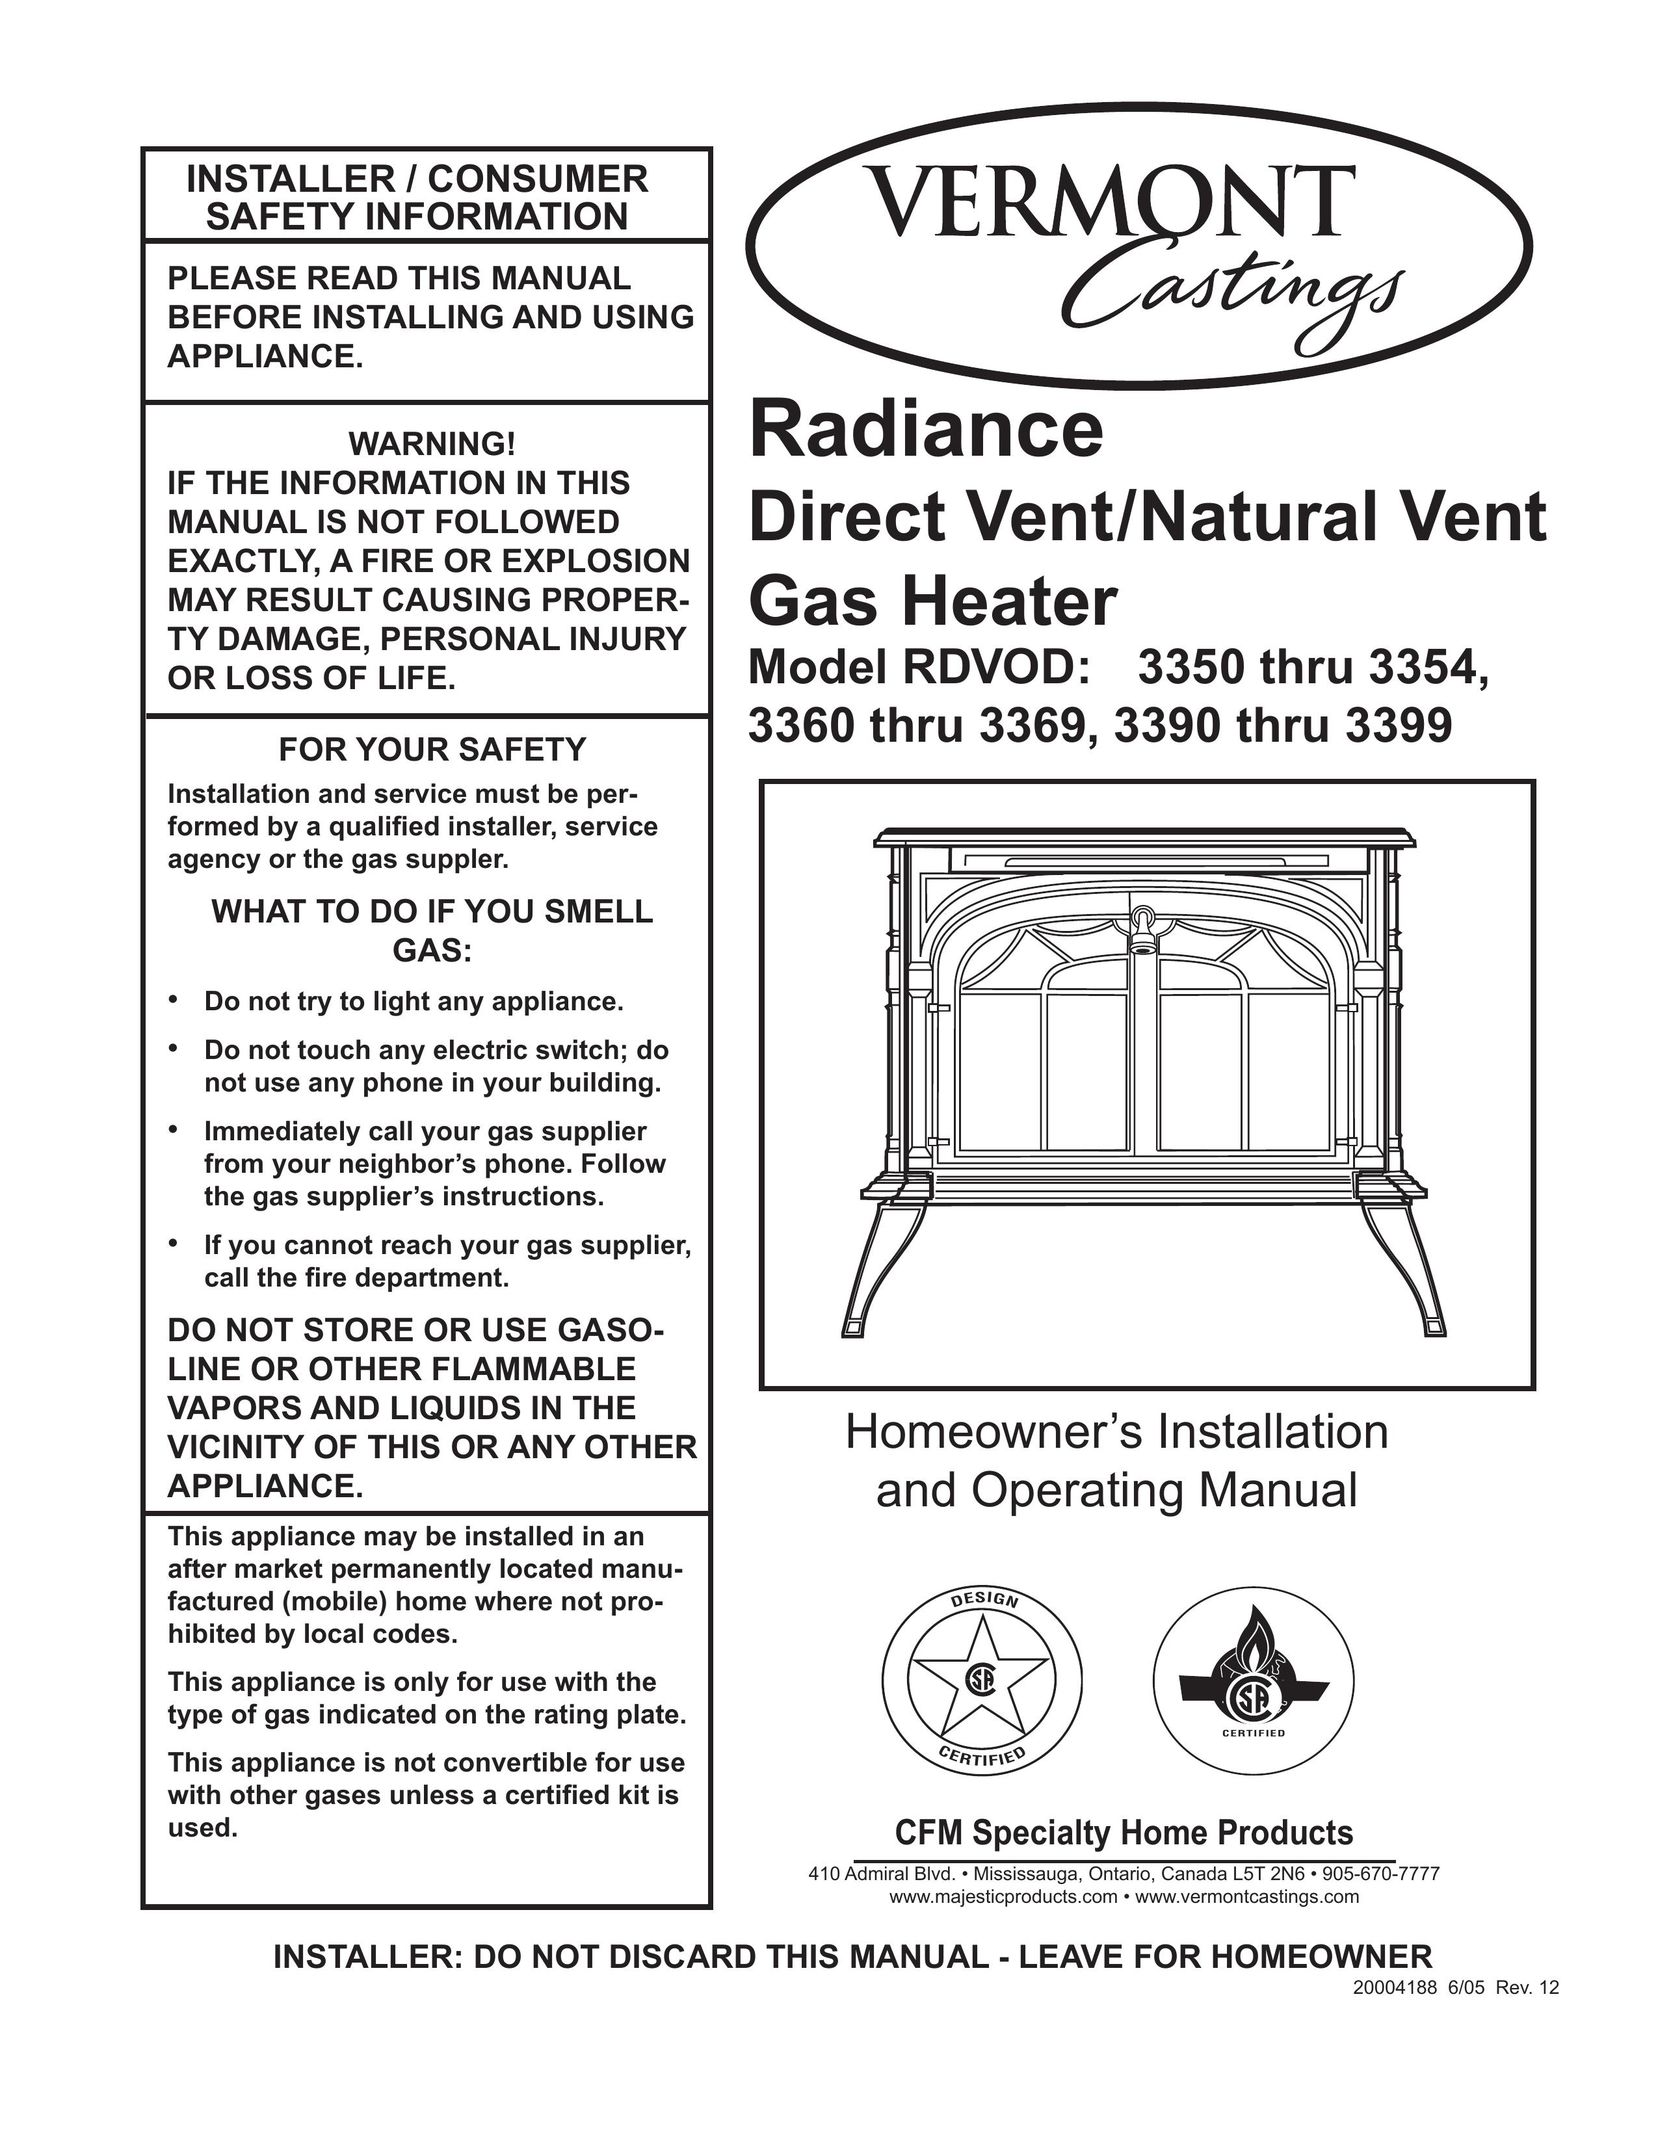 Vermont Casting RDVOD 3369 Electric Heater User Manual